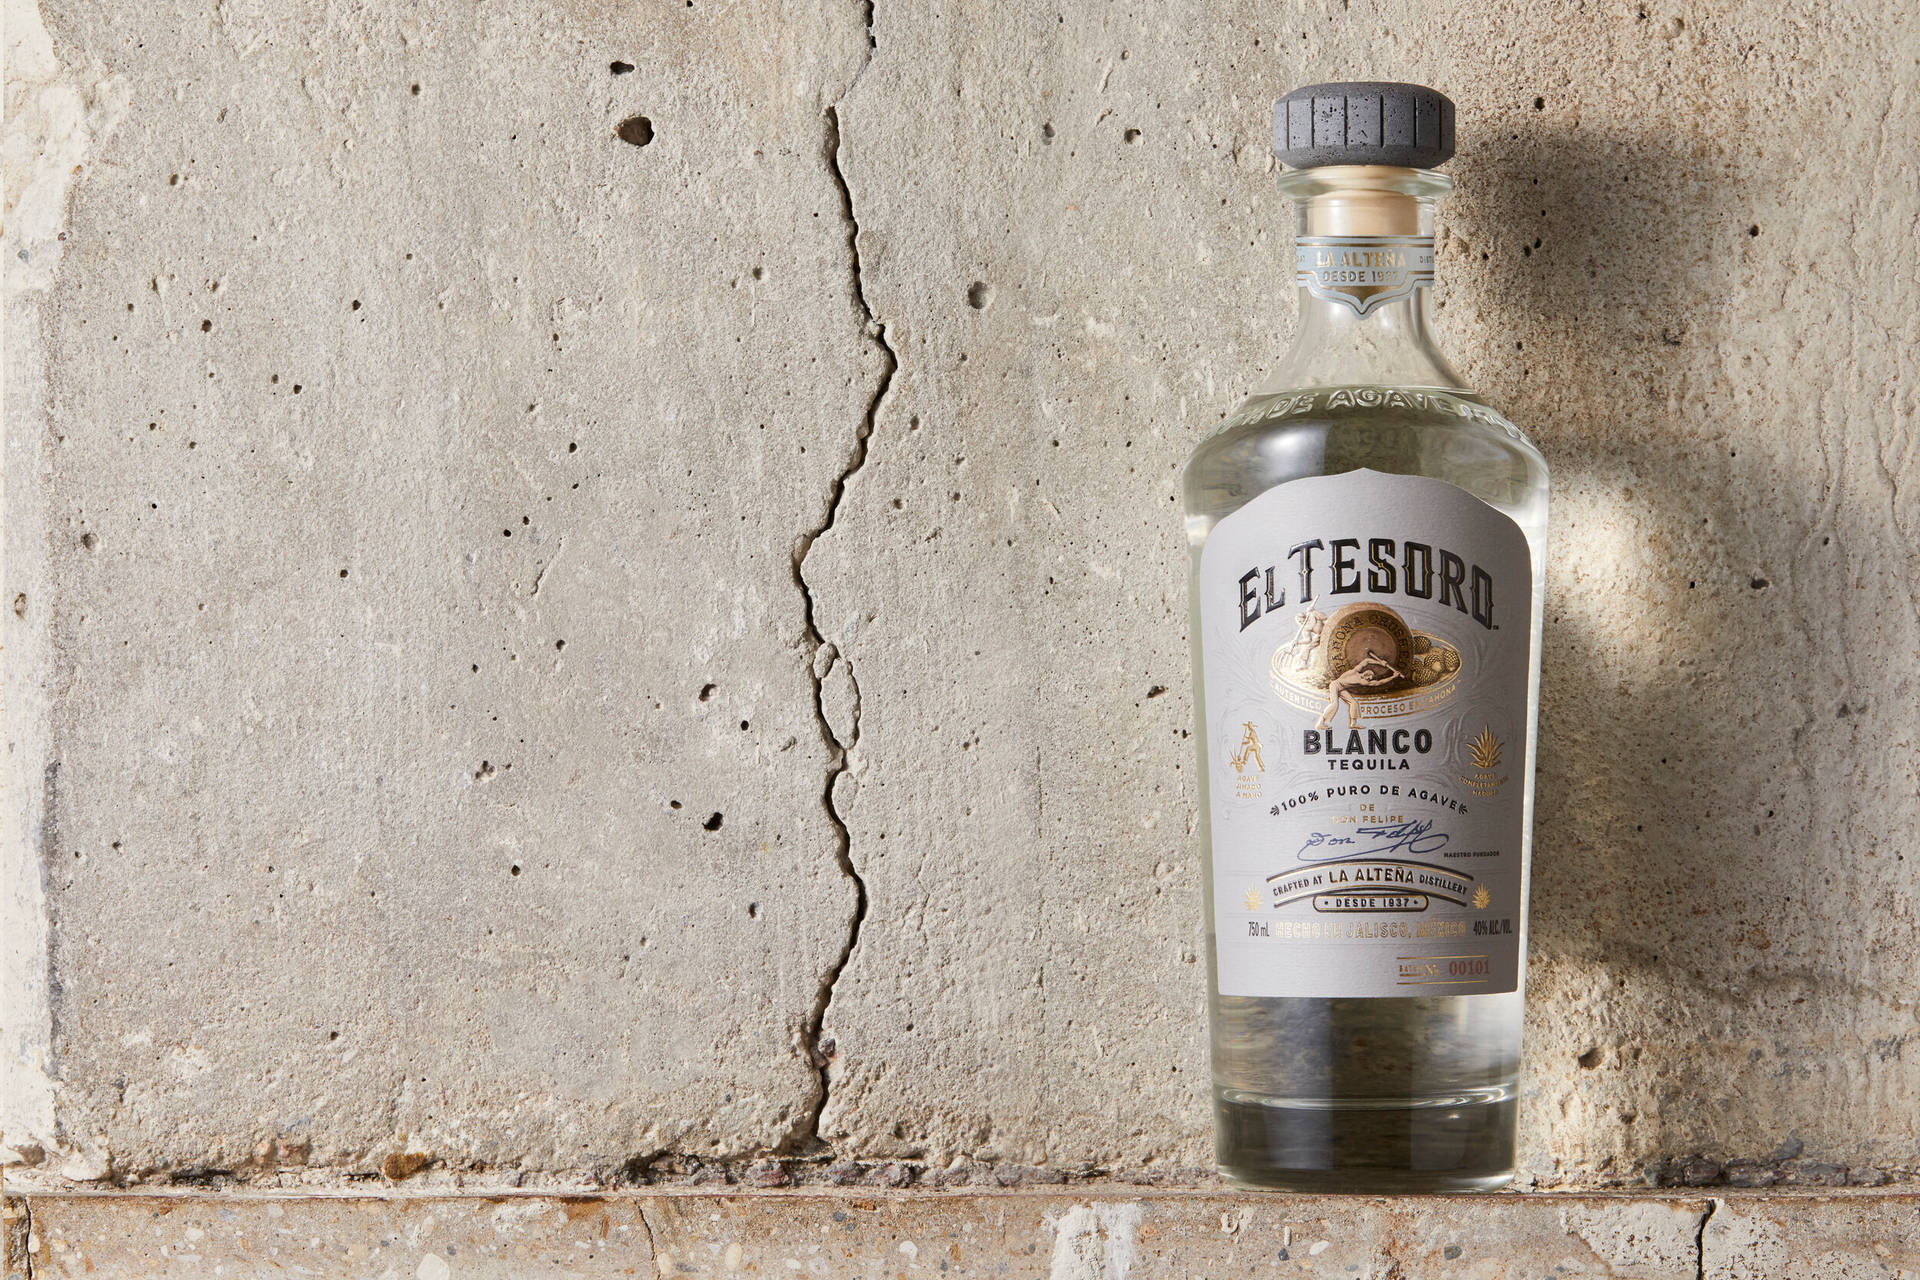 El Tesoro Blanco Tequila On Cracked Wall Picture